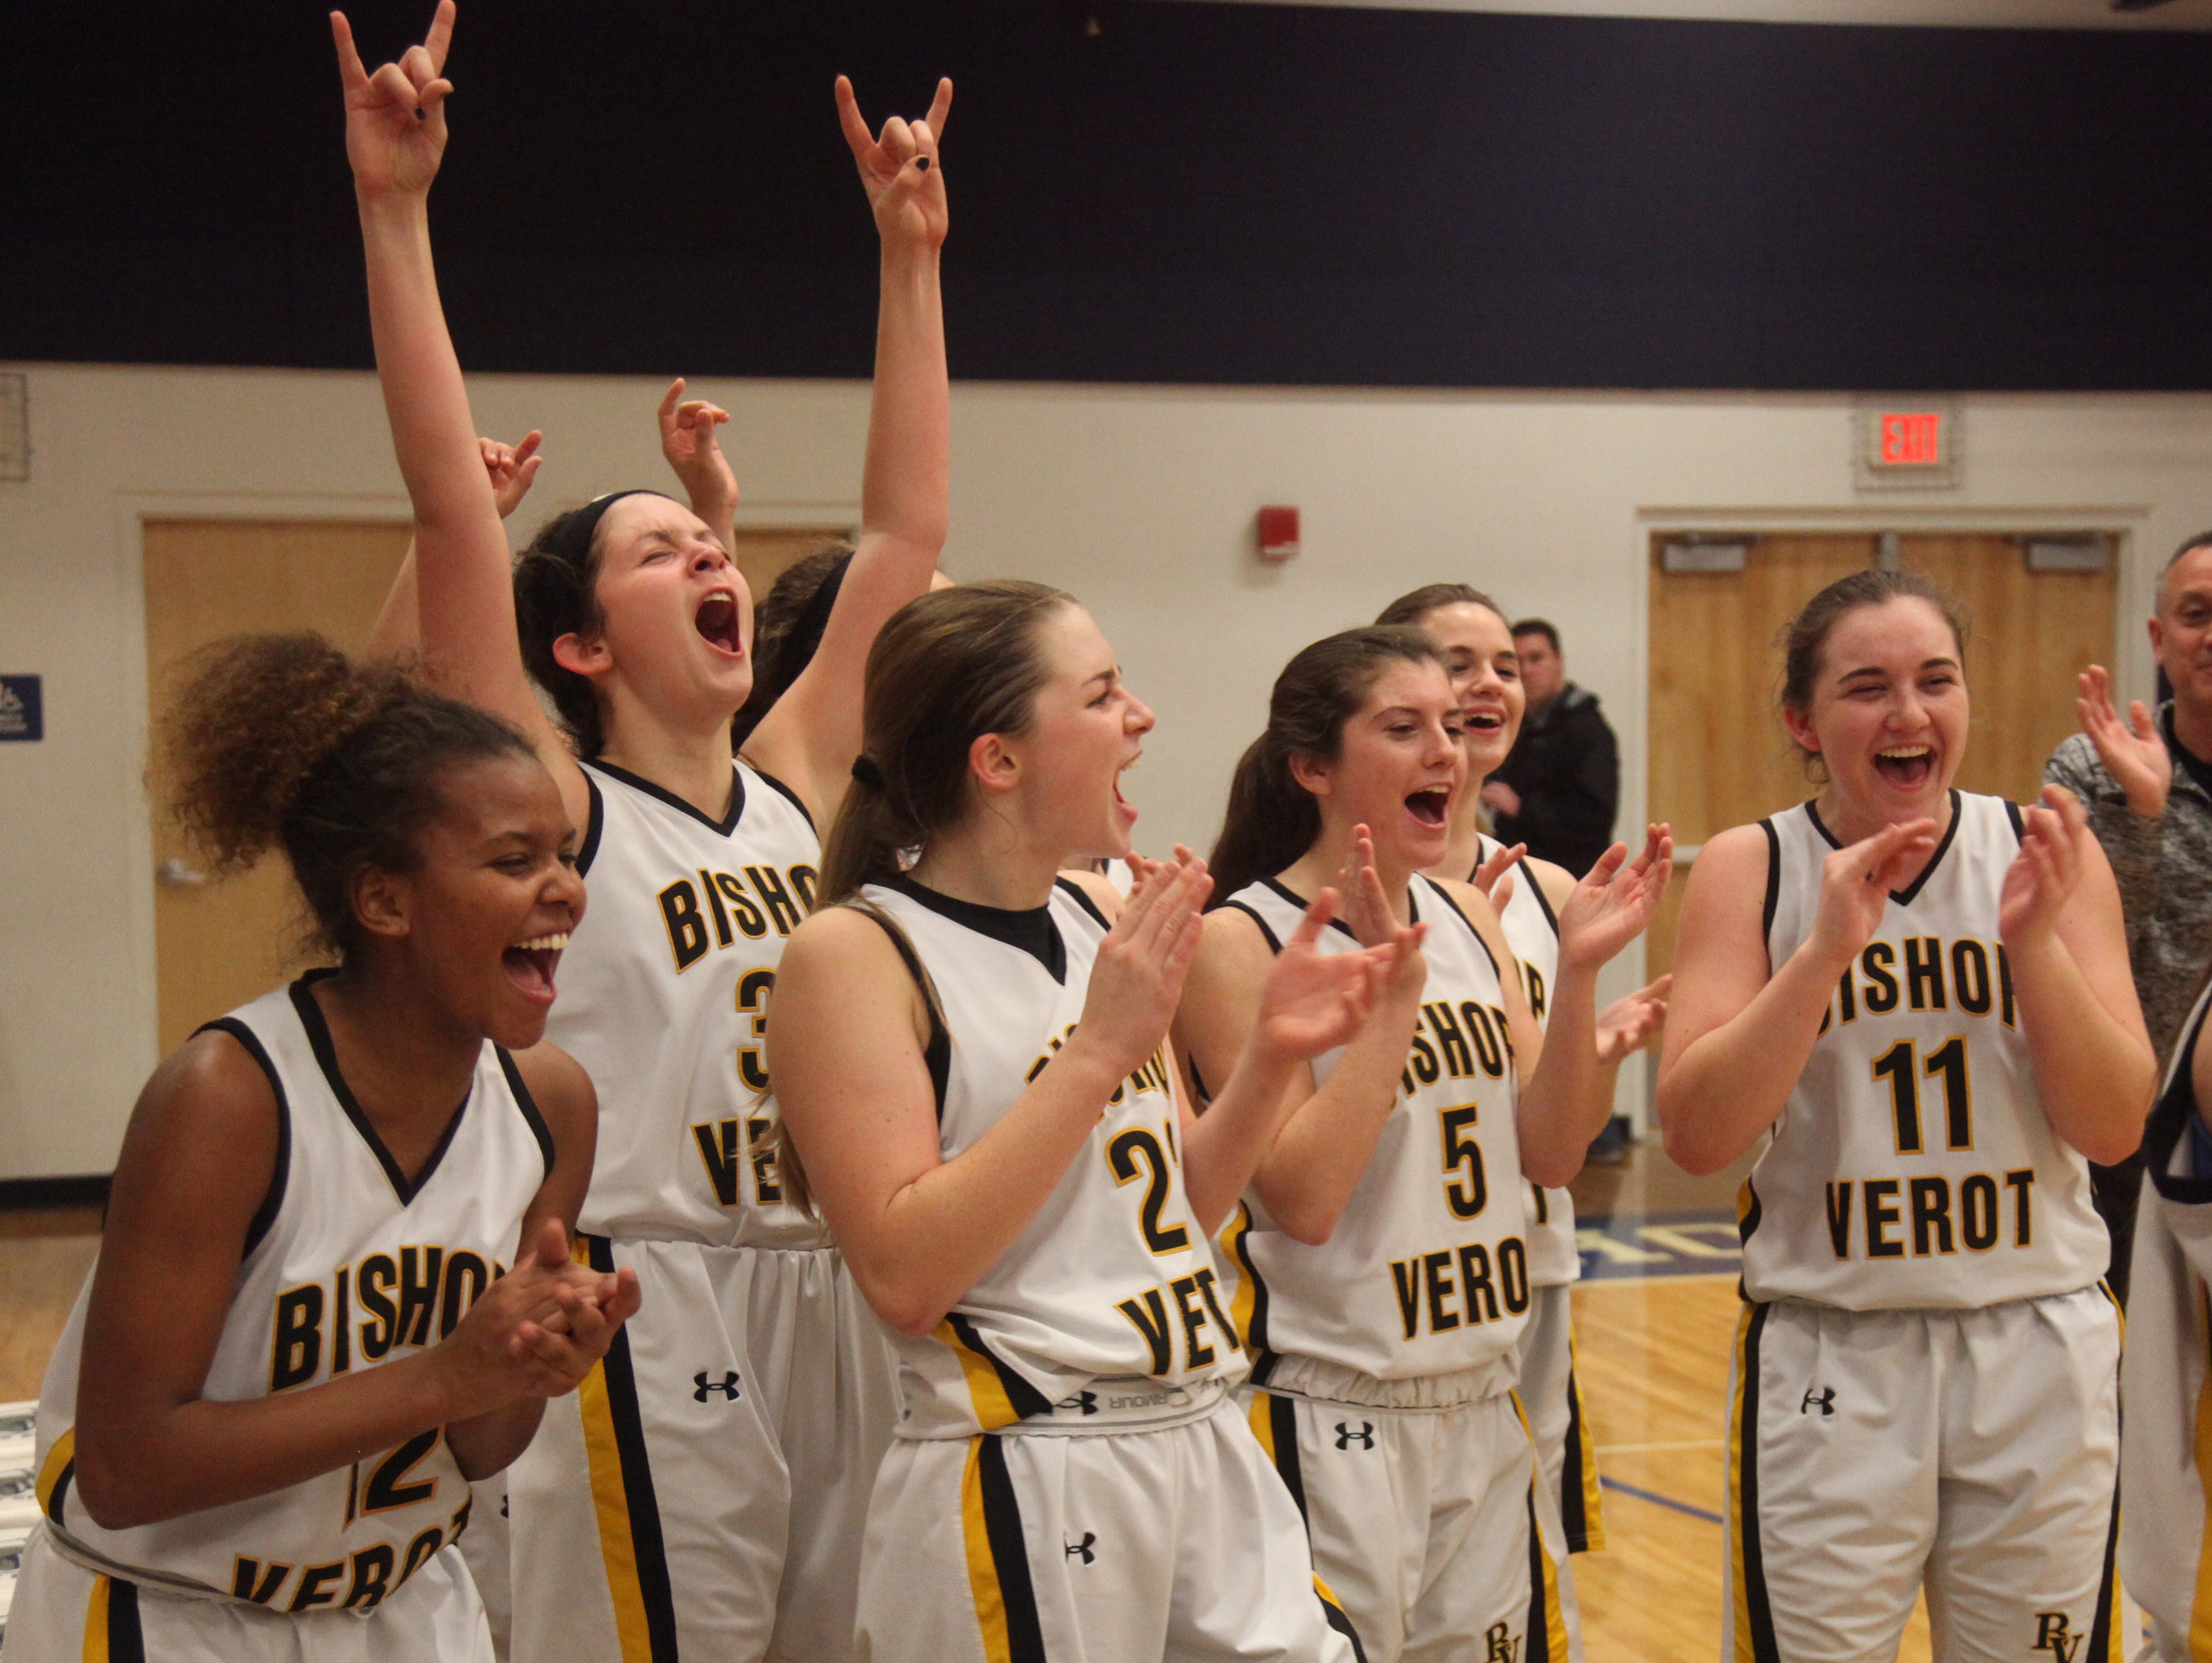 Members of the Bishop Verot High School girls basketball team celebrate after defeating Gateway Charter in the District 4A-10 finals on Thursday at Oasis High School.